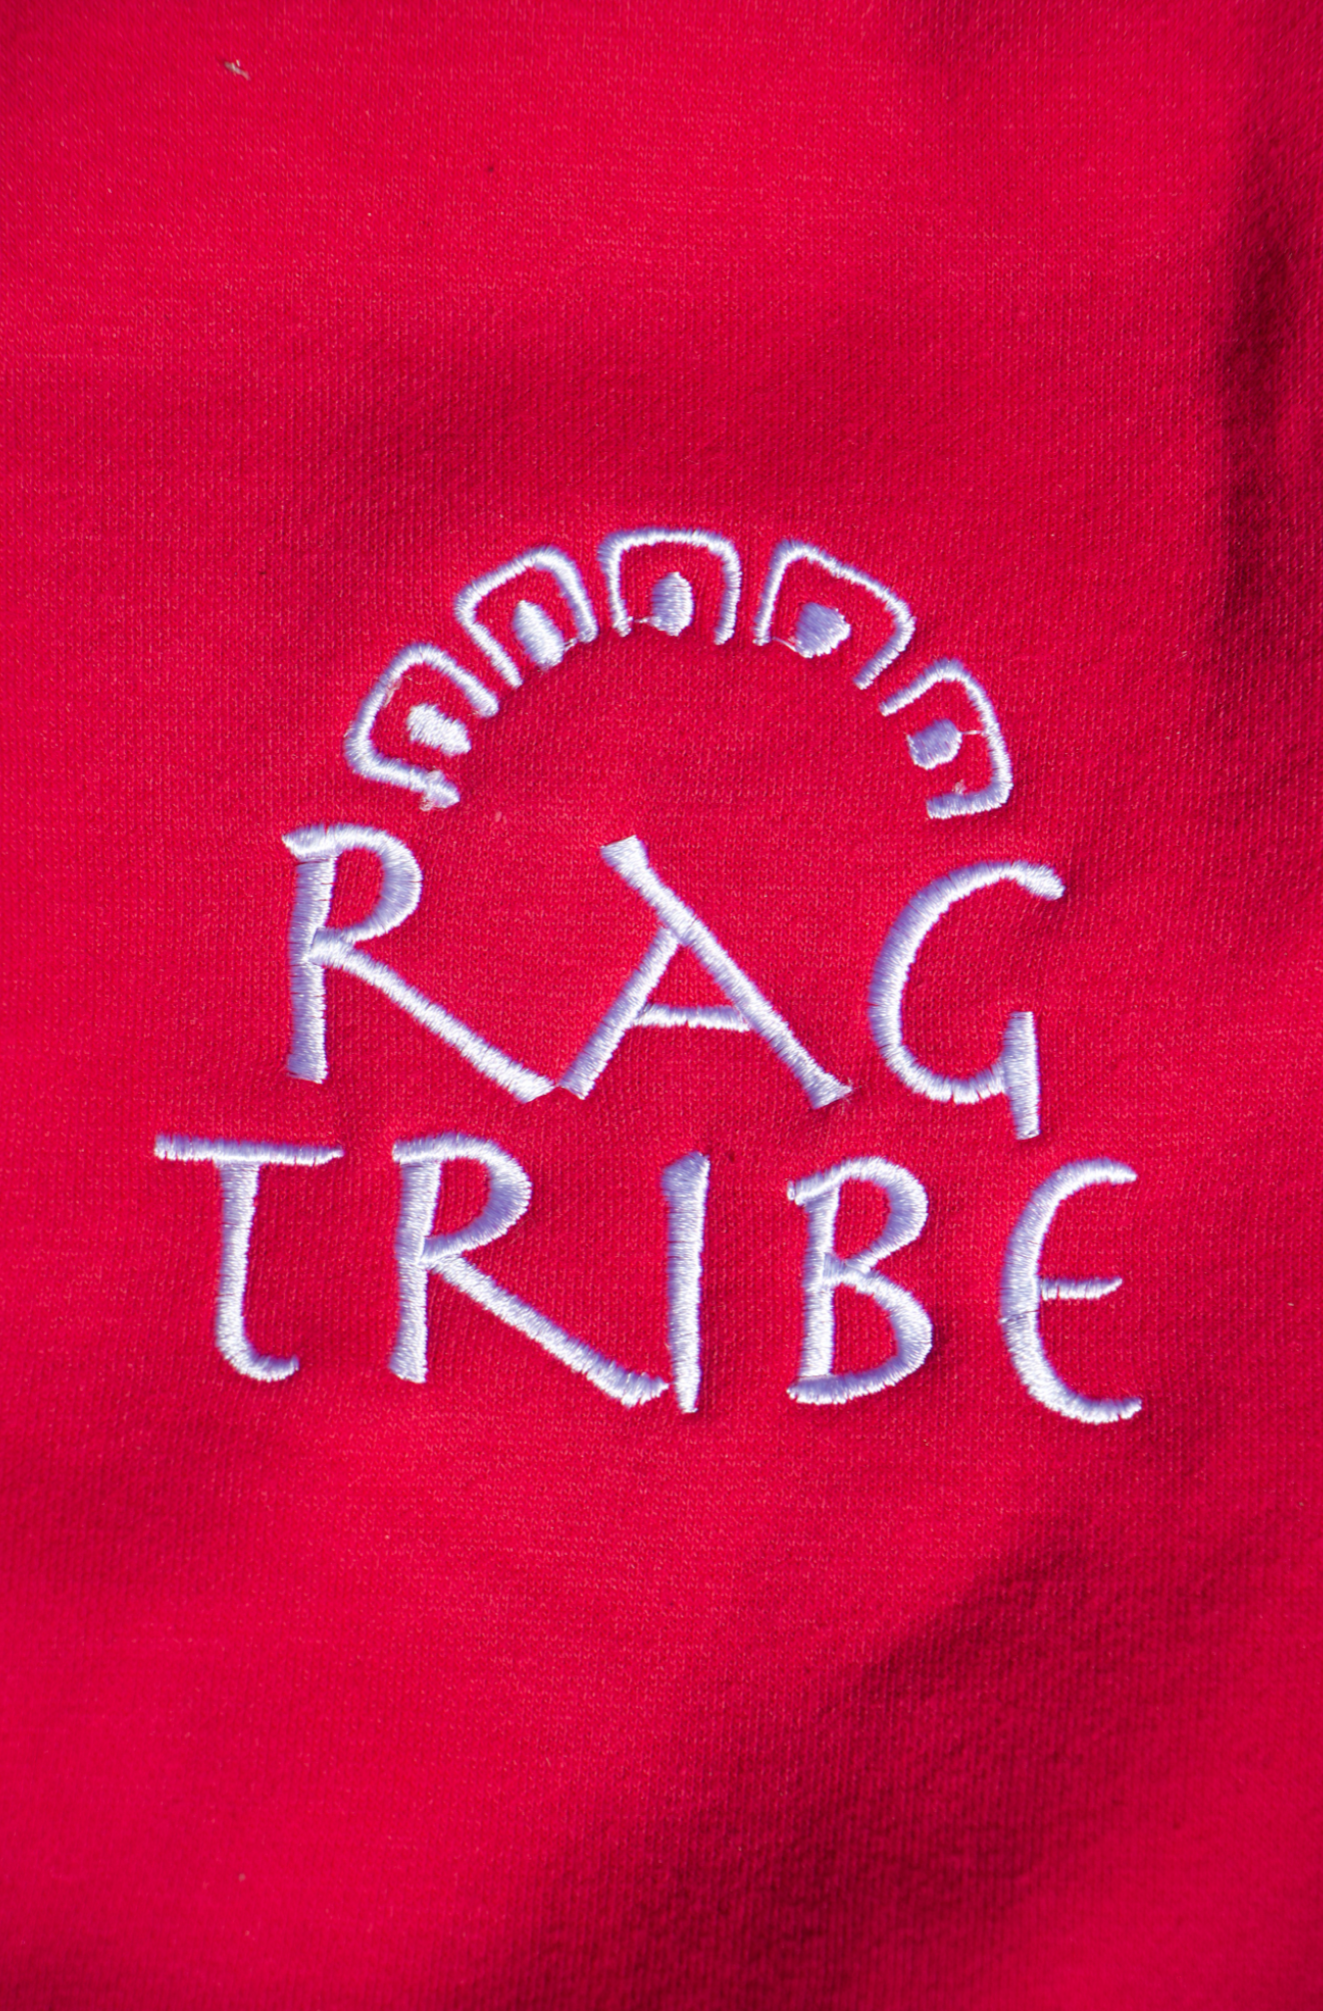 The Raise the Vibe Jogger - Ragtribe Ethical Clothing & Productions, LLC